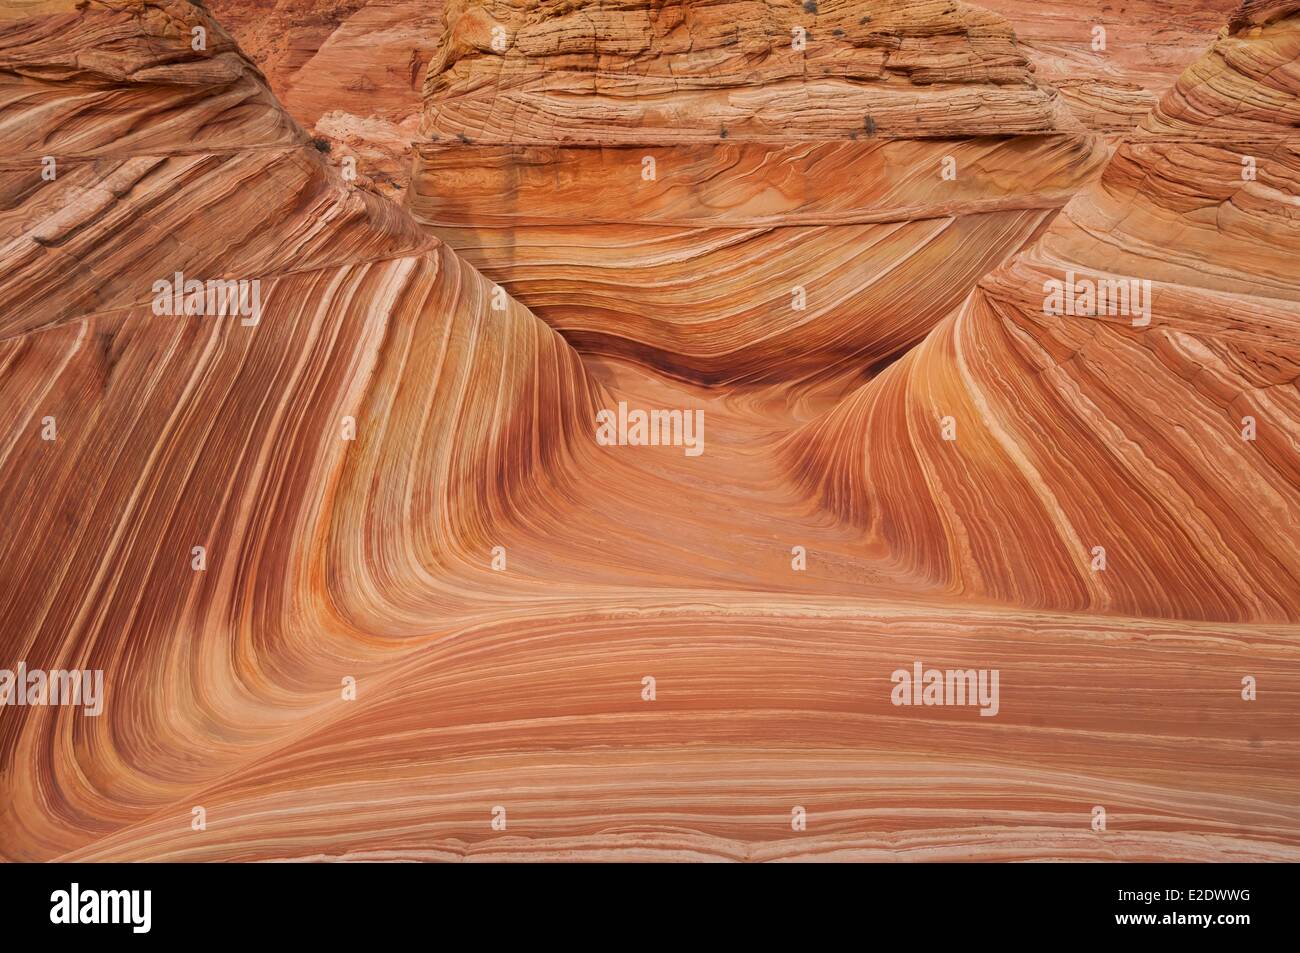 United States Arizona The Wave Coyote Buttes Marble Canyon Vermilion Cliffs Paria river Stock Photo